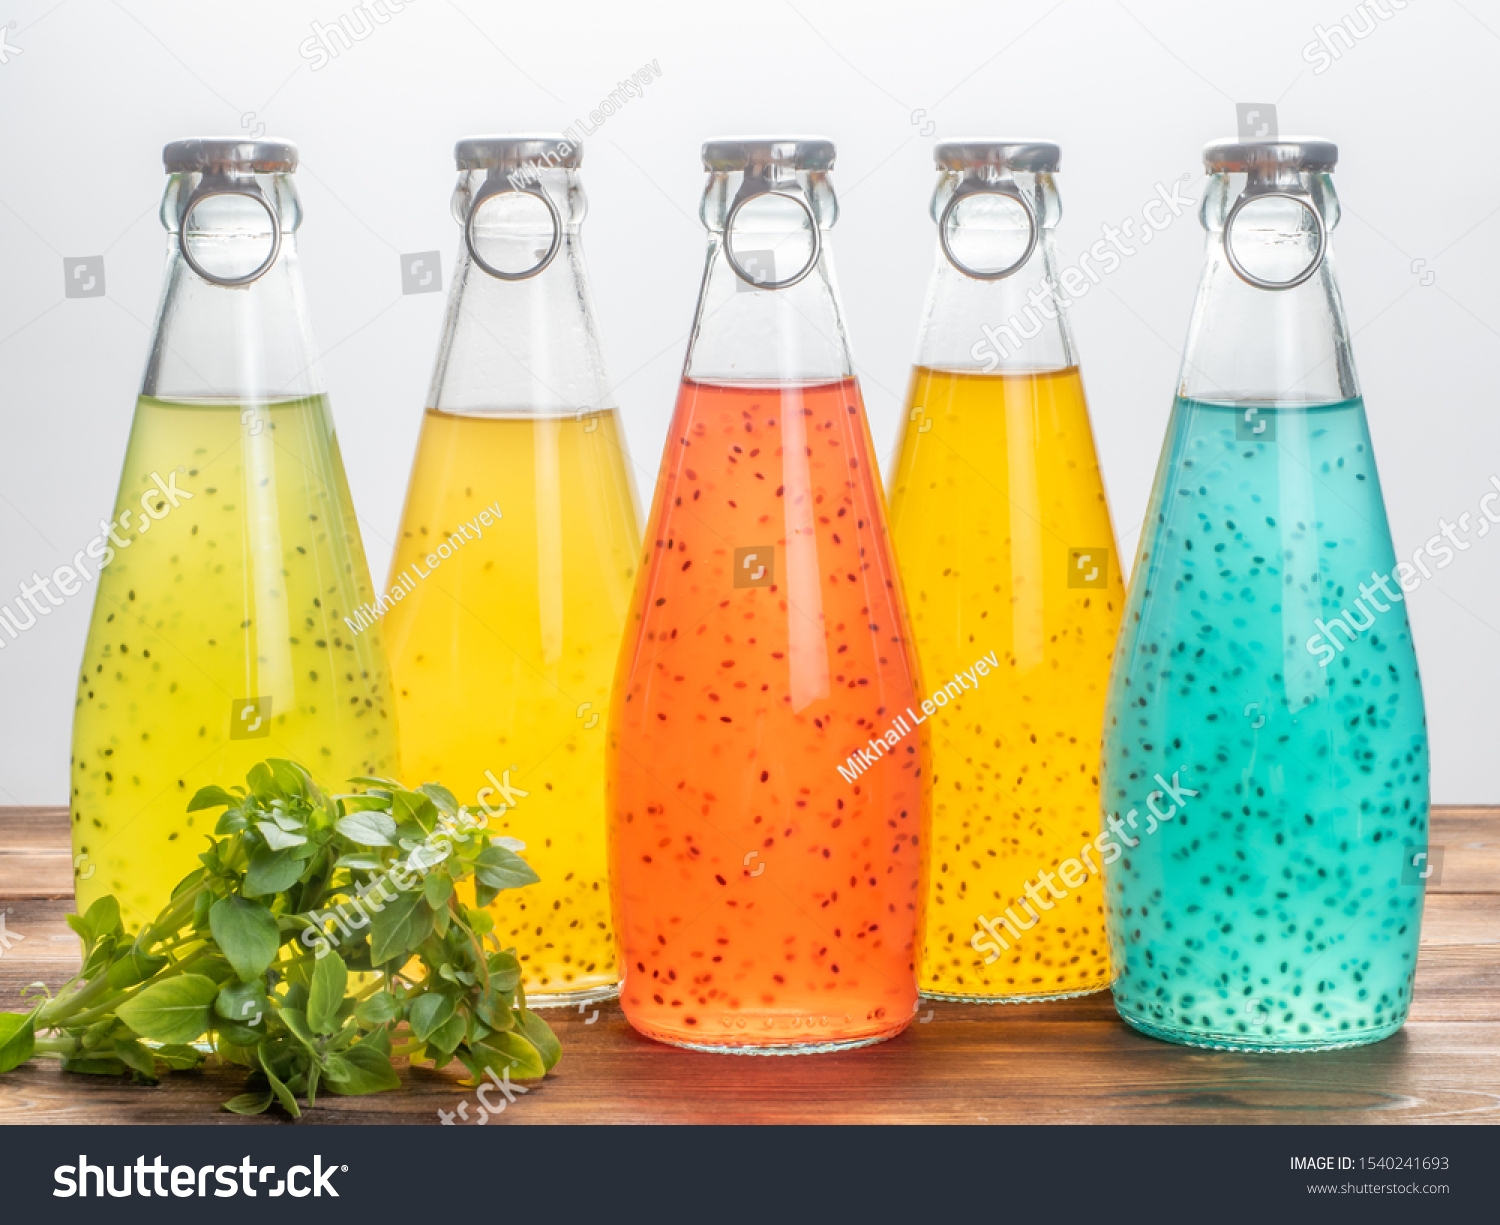 Five bottles of Basil Seed on a white background with basil leaves. Red, yellow, light blue and green color. Soft focus. #1540241693